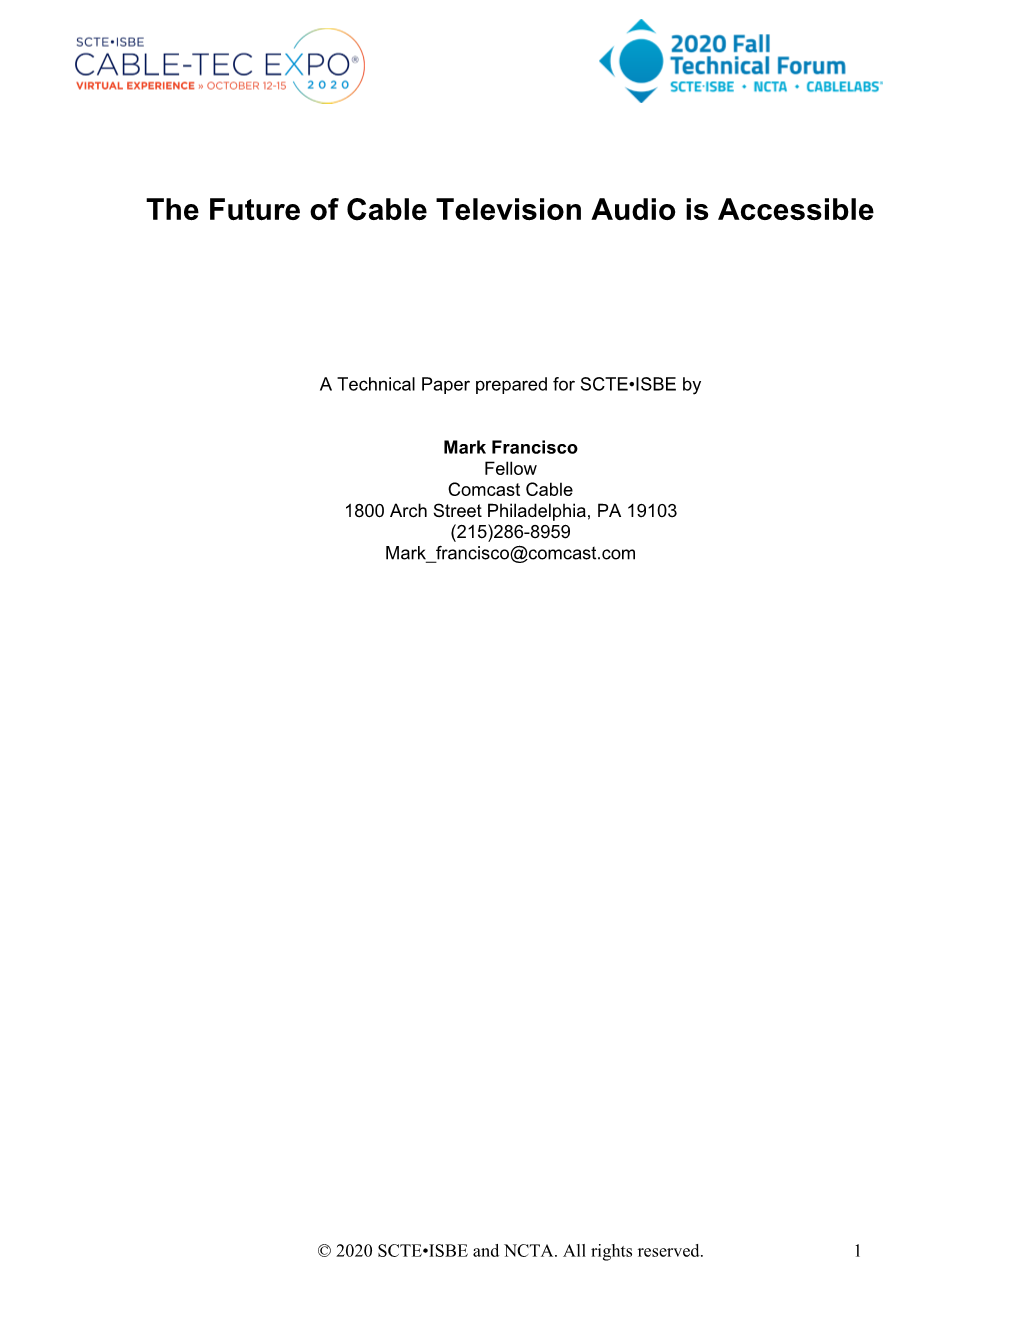 The Future of Cable Television Audio Is Accessible